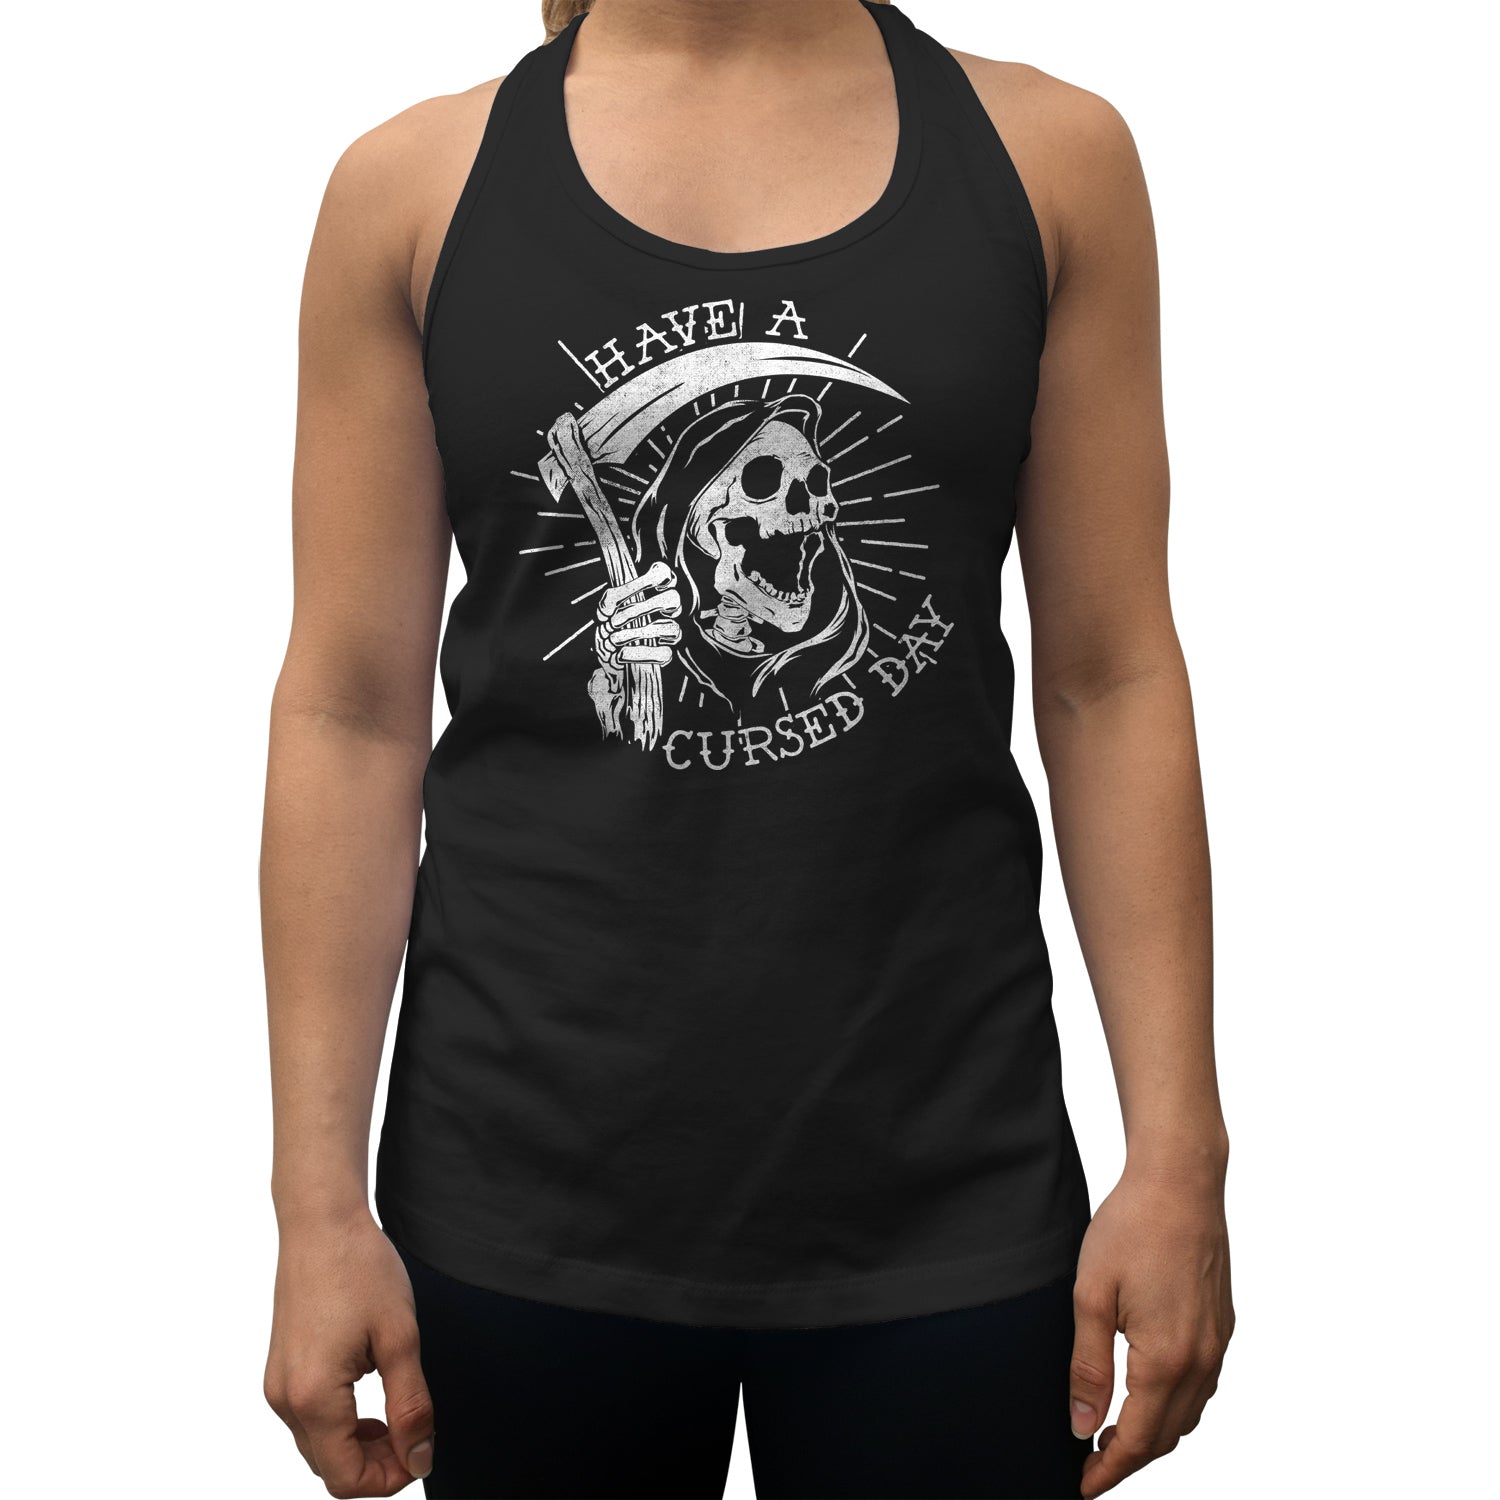 Women's Have a Cursed Day Racerback Tank Top